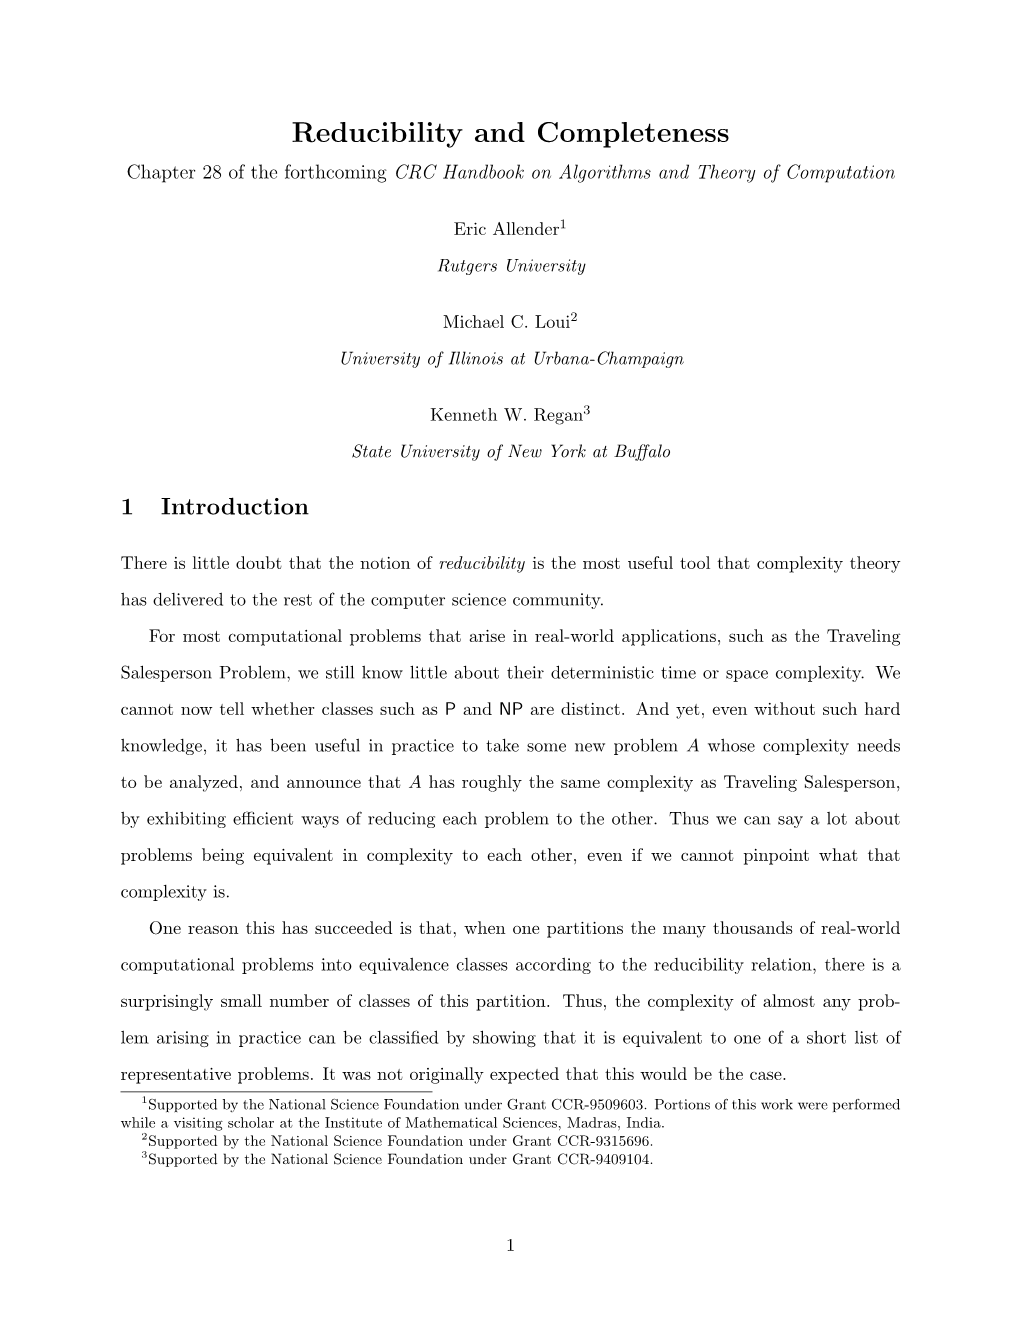 Reducibility and Completeness Chapter 28 of the Forthcoming CRC Handbook on Algorithms and Theory of Computation